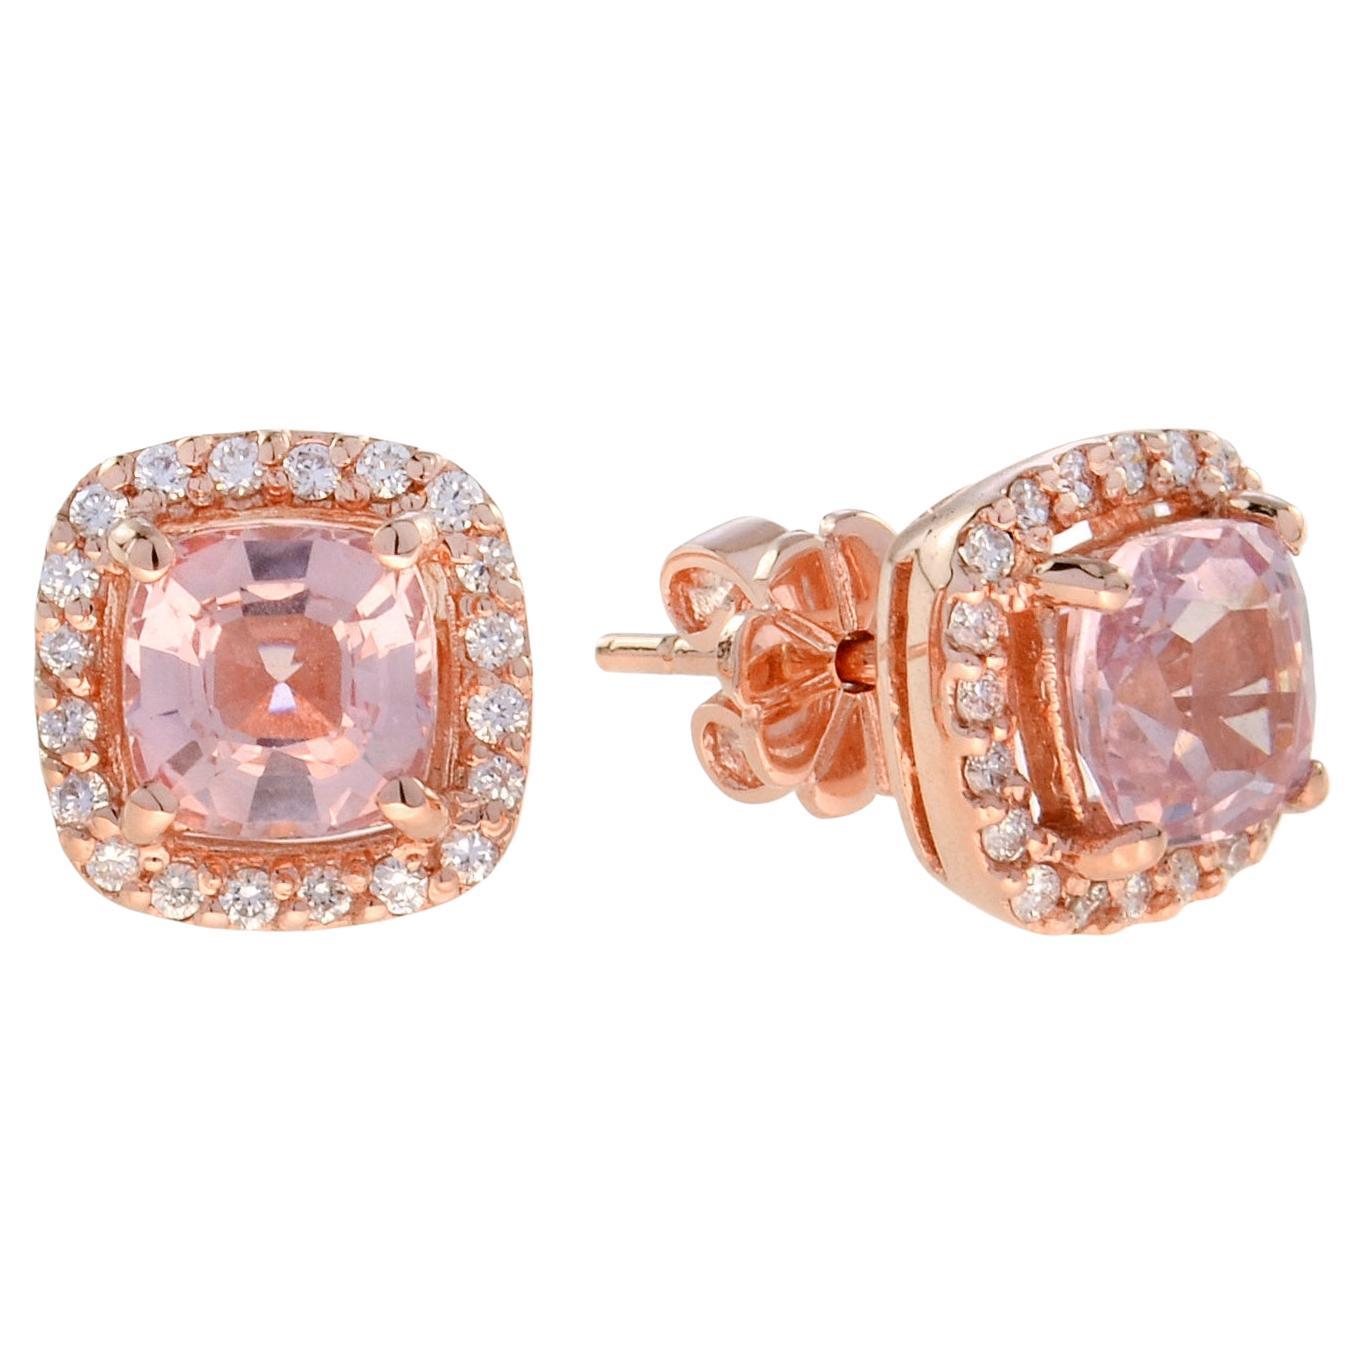 Halona Cushion Morganite and Diamond Stud Earrings in 14K Rose Gold For Sale